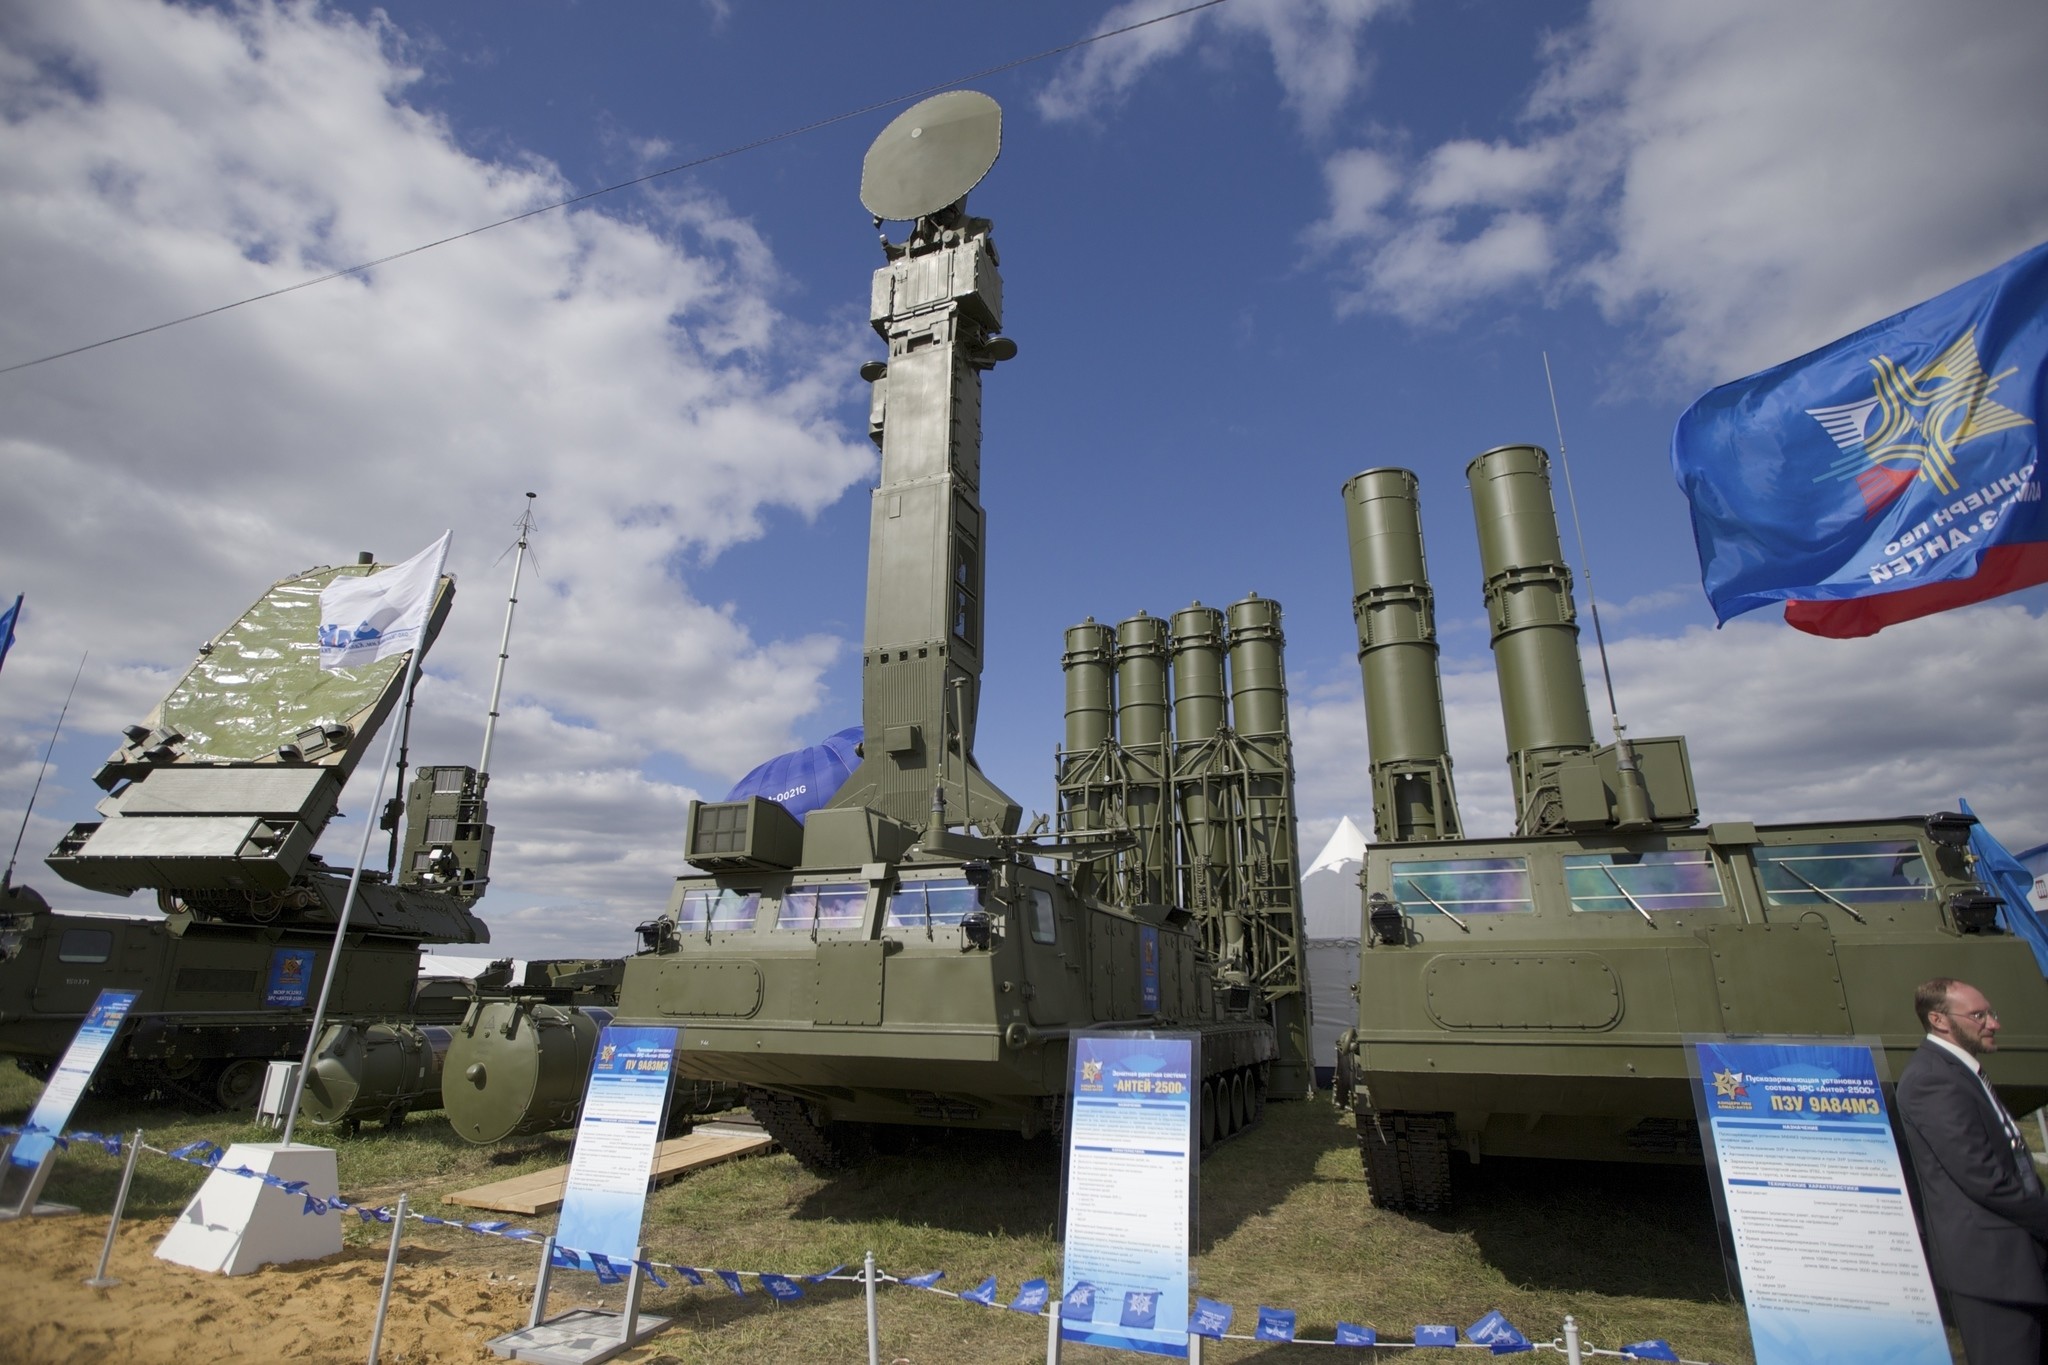 Russian air defense system missile system Antey 2500, or S-300 VM, is on display at the opening of the MAKS Air Show in Zhukovsky outside Moscow, Russia. (AP Photo)